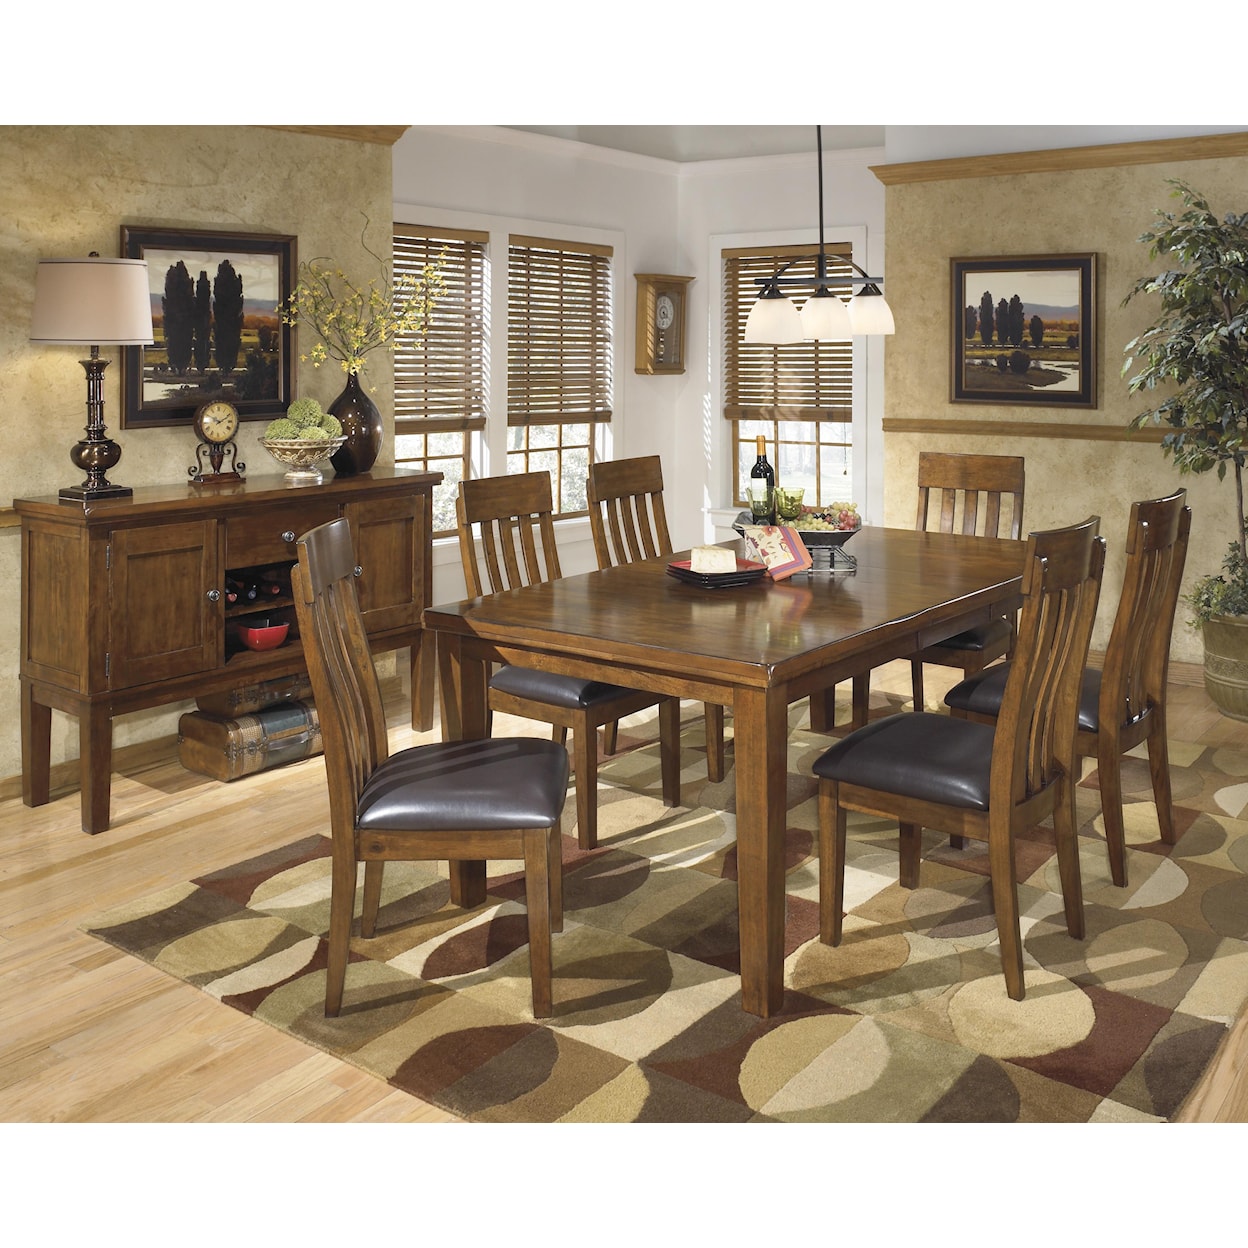 Signature Design by Ashley Ralene Formal Dining Room Group